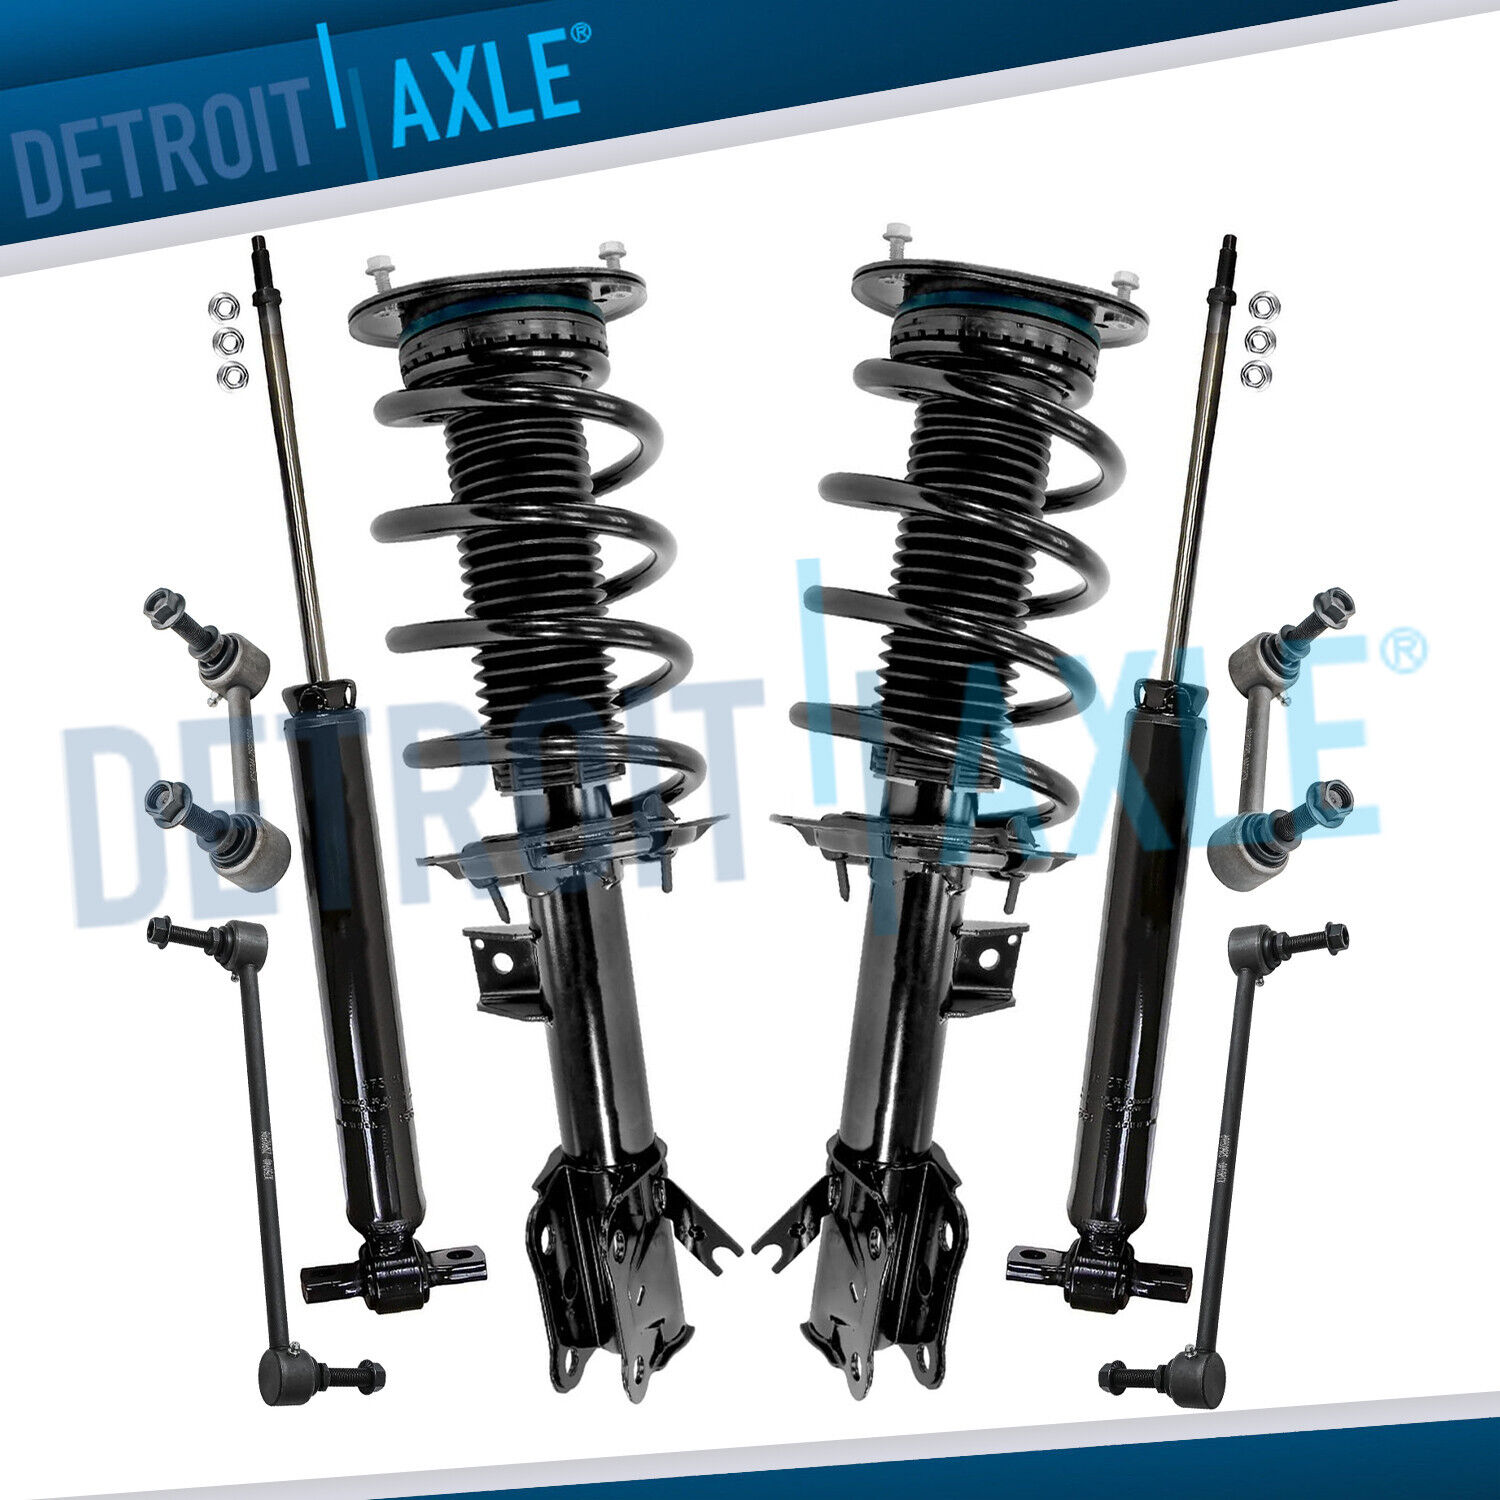 Front Strut Spring Rear Shock Sway Bar Suspension Kit for Ford Edge Lincoln MKX